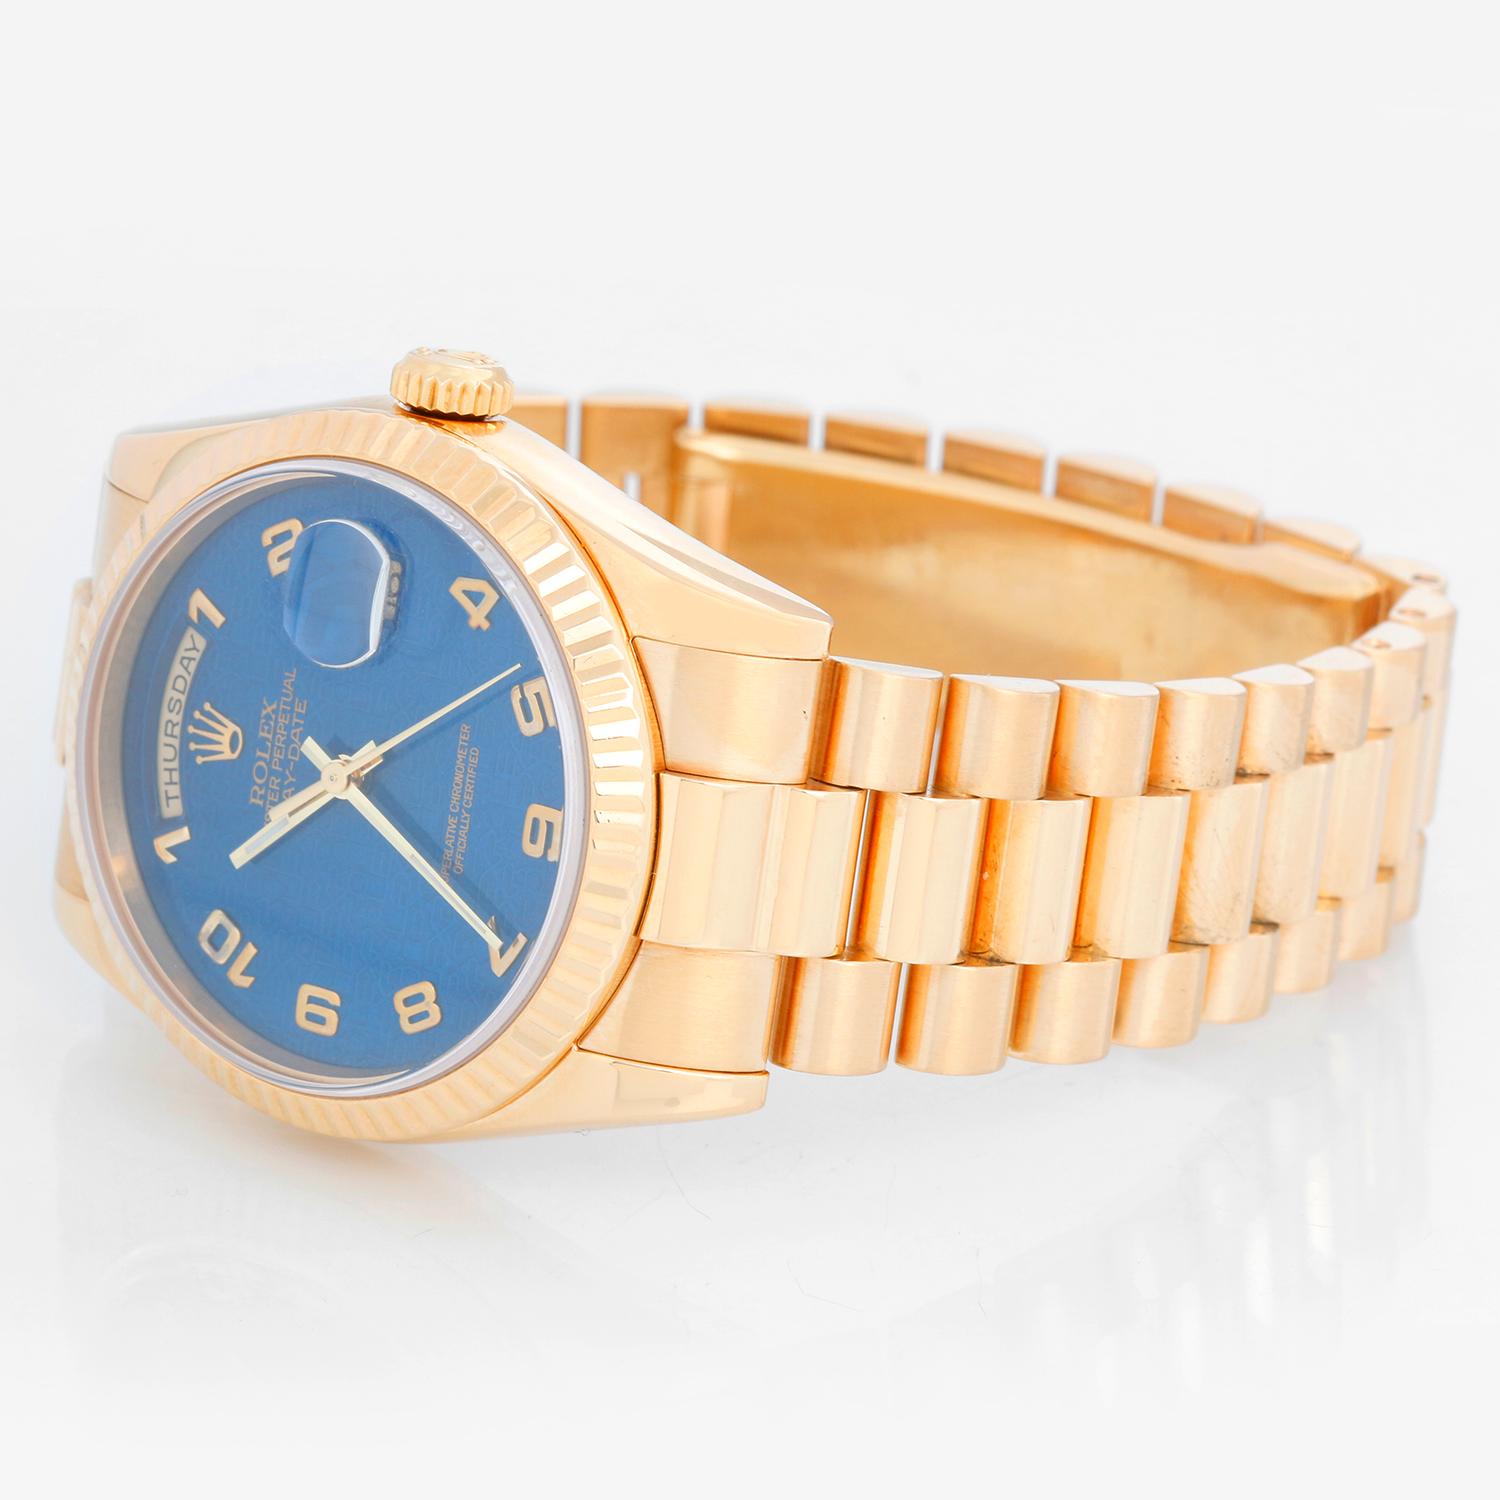 Rolex President Day-Date Men's Watch Blue Jubilee Dial 118238 - Automatic winding, 31 jewels, Quickset, sapphire crystal. 18k yellow gold case with fluted bezel (36mm diameter). Blue jubilee dial with Arabic numerals. 18k yellow gold hidden-clasp